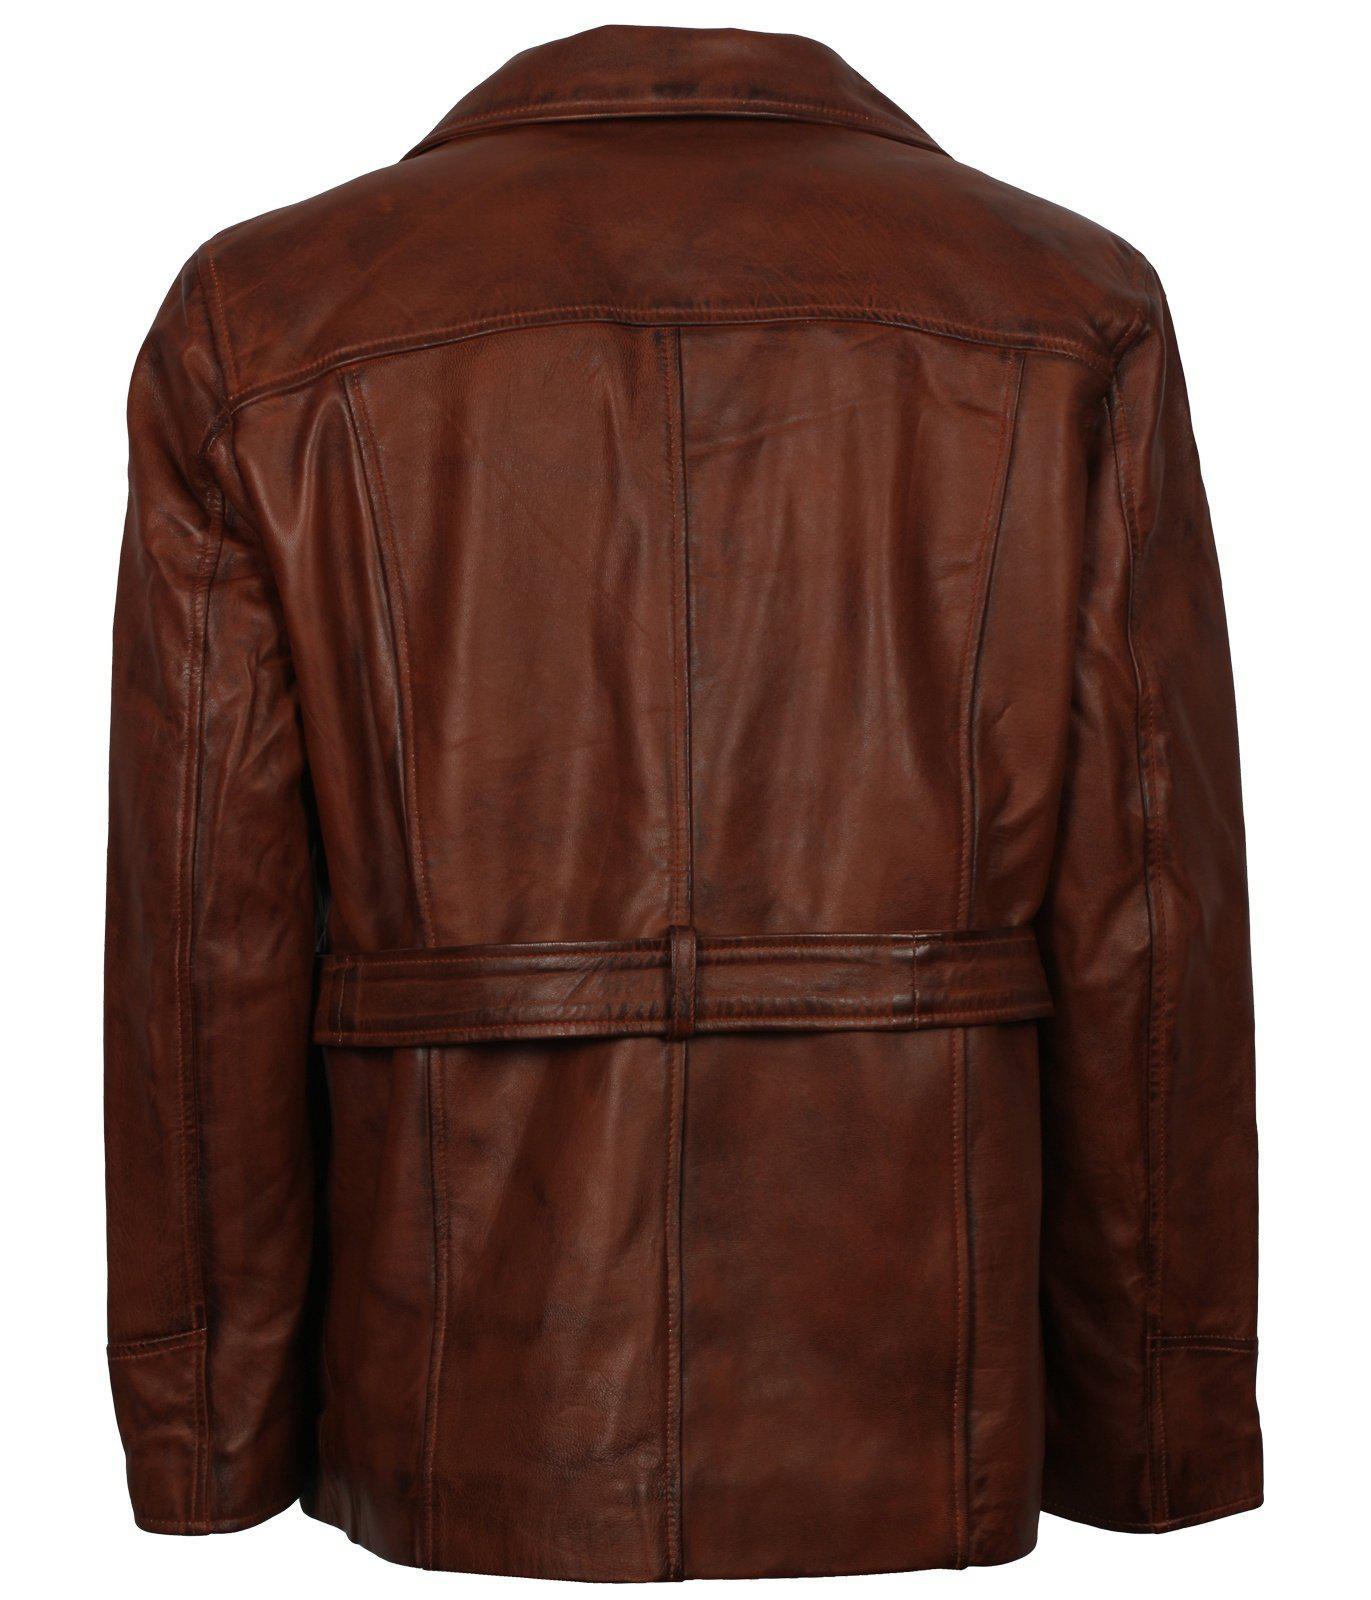 Men's Brown Leather Trench Coat